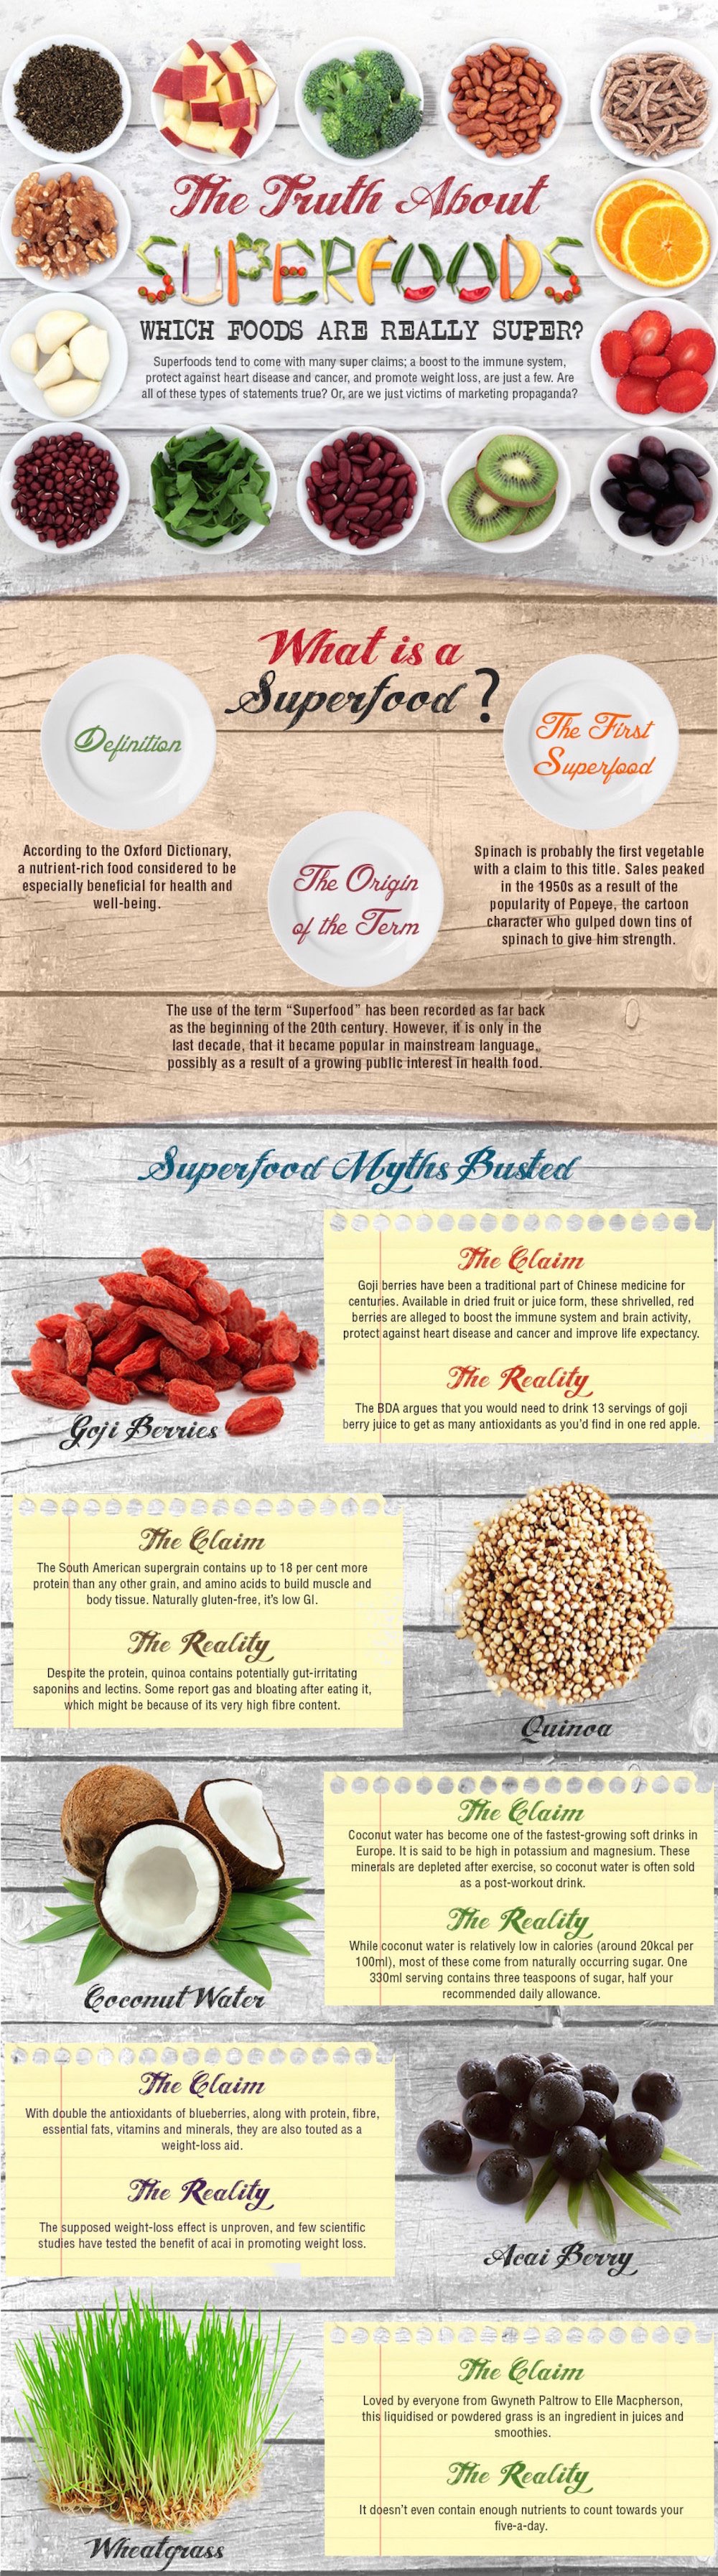 infographic--the-truth-about-superfoods 1